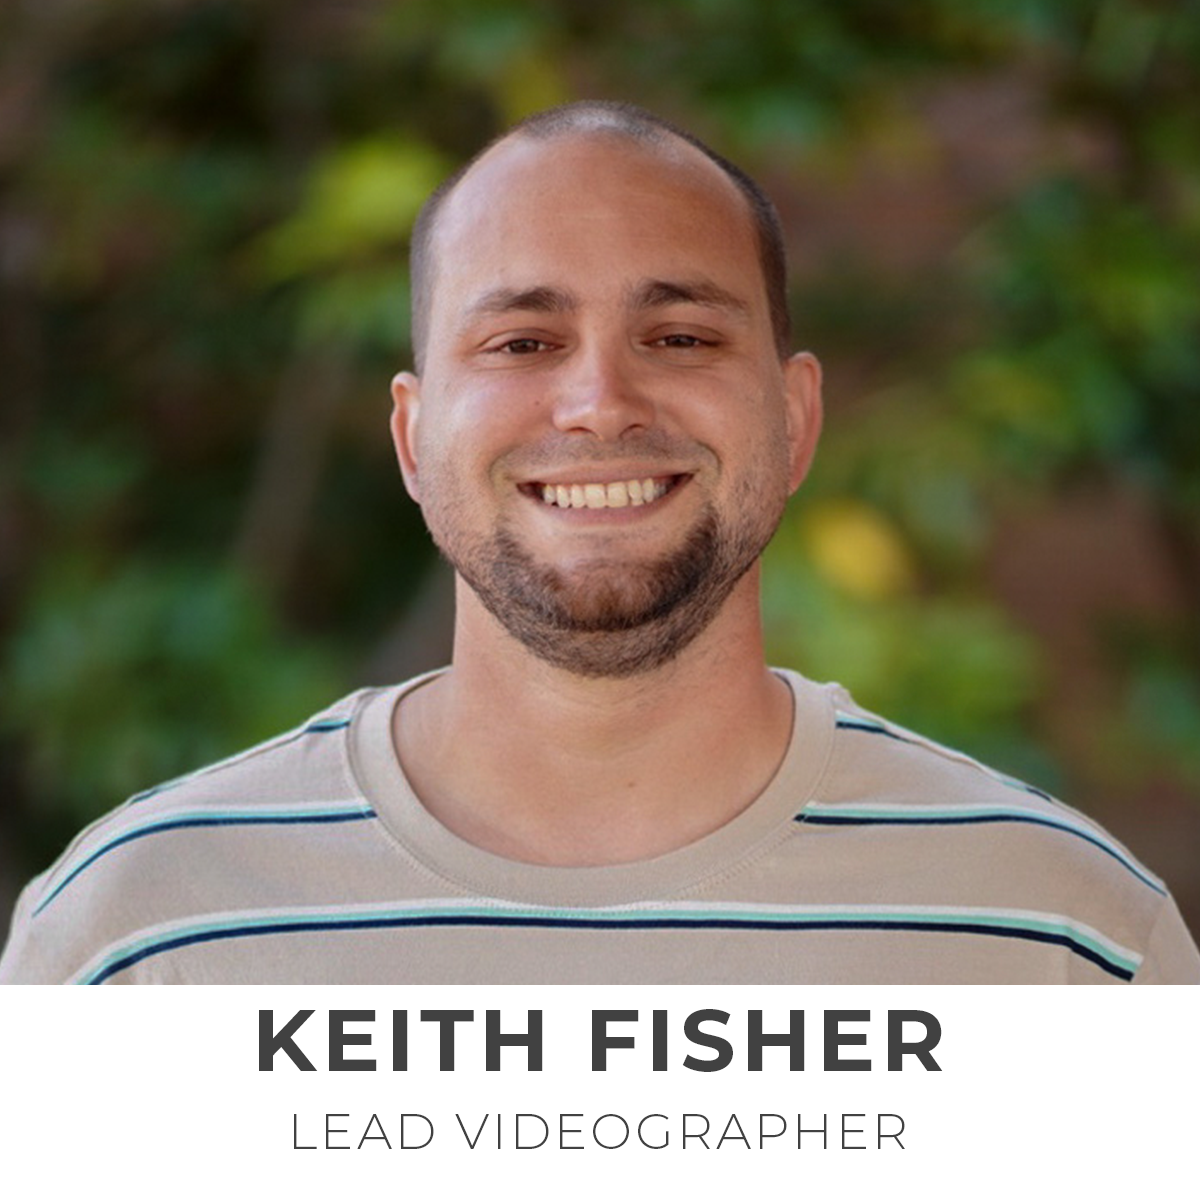 Keith Fisher, Lead Videographer